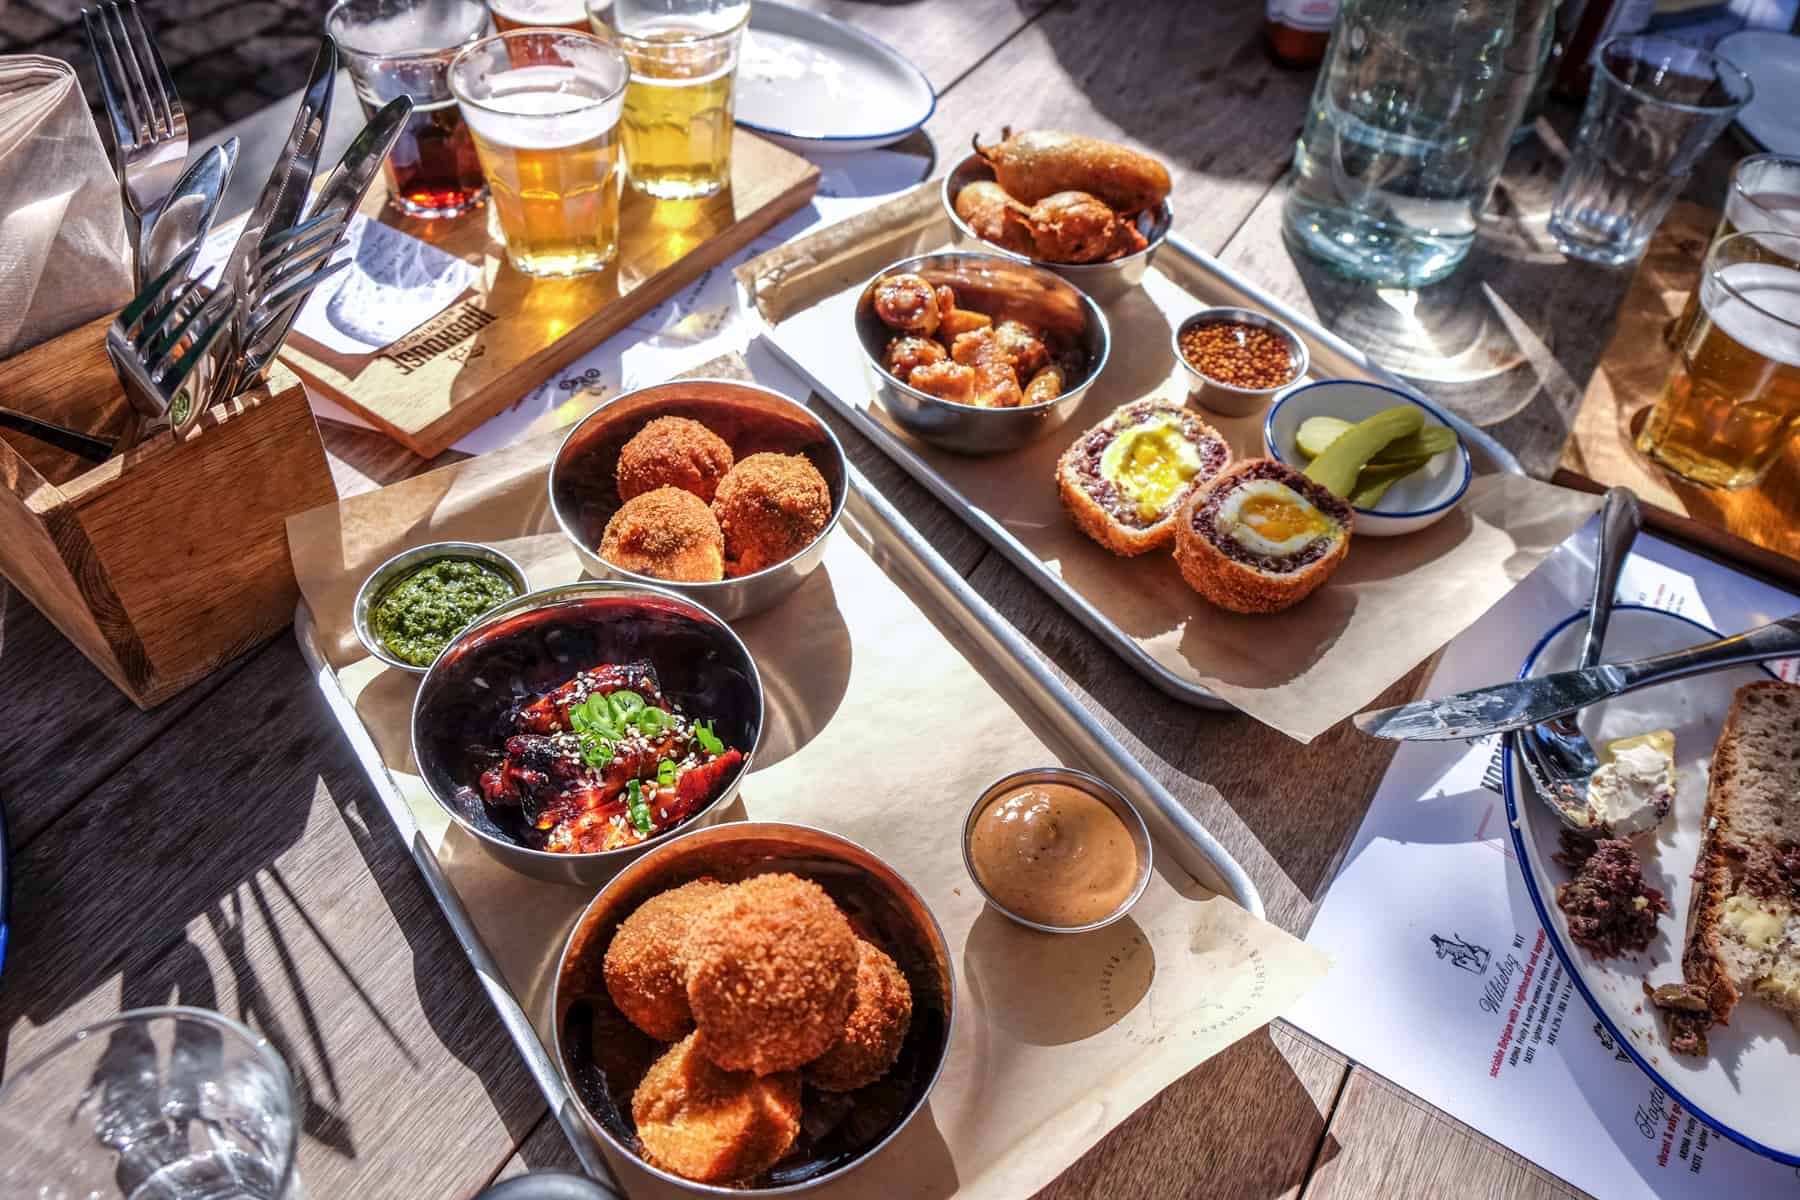 Two silver trays contained breadcrumbled balls, bowls of green and red sauces and a cut pork pie. Behind the trays is a tasting platter of four beers. The selection is from the Hoghouse BBQ at Spier Wine Estate 